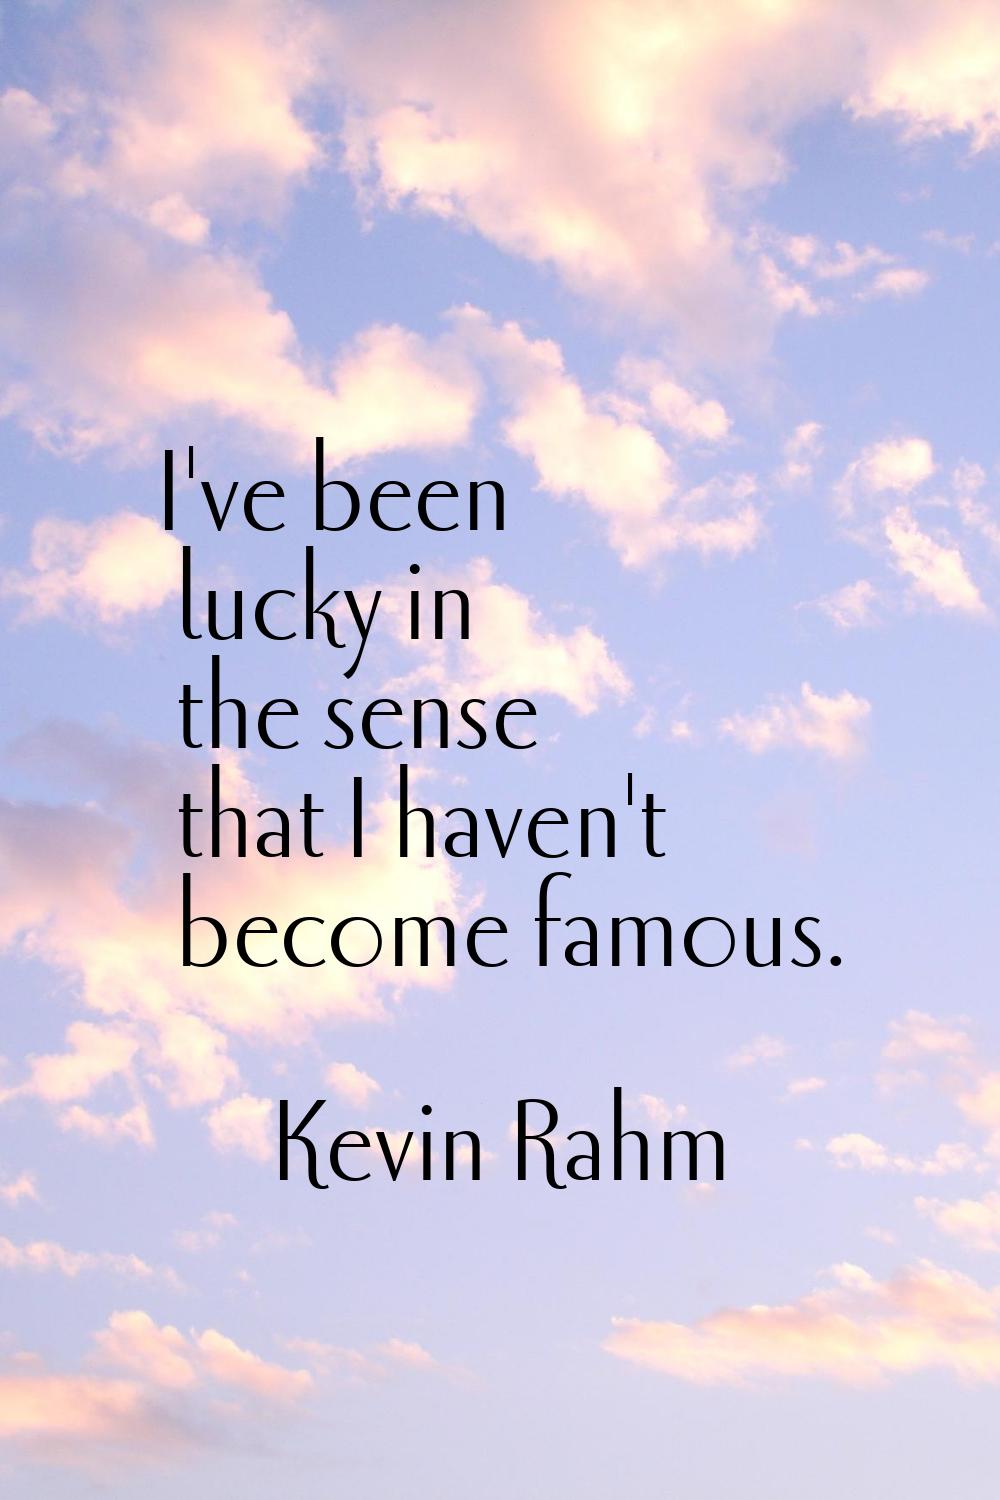 I've been lucky in the sense that I haven't become famous.